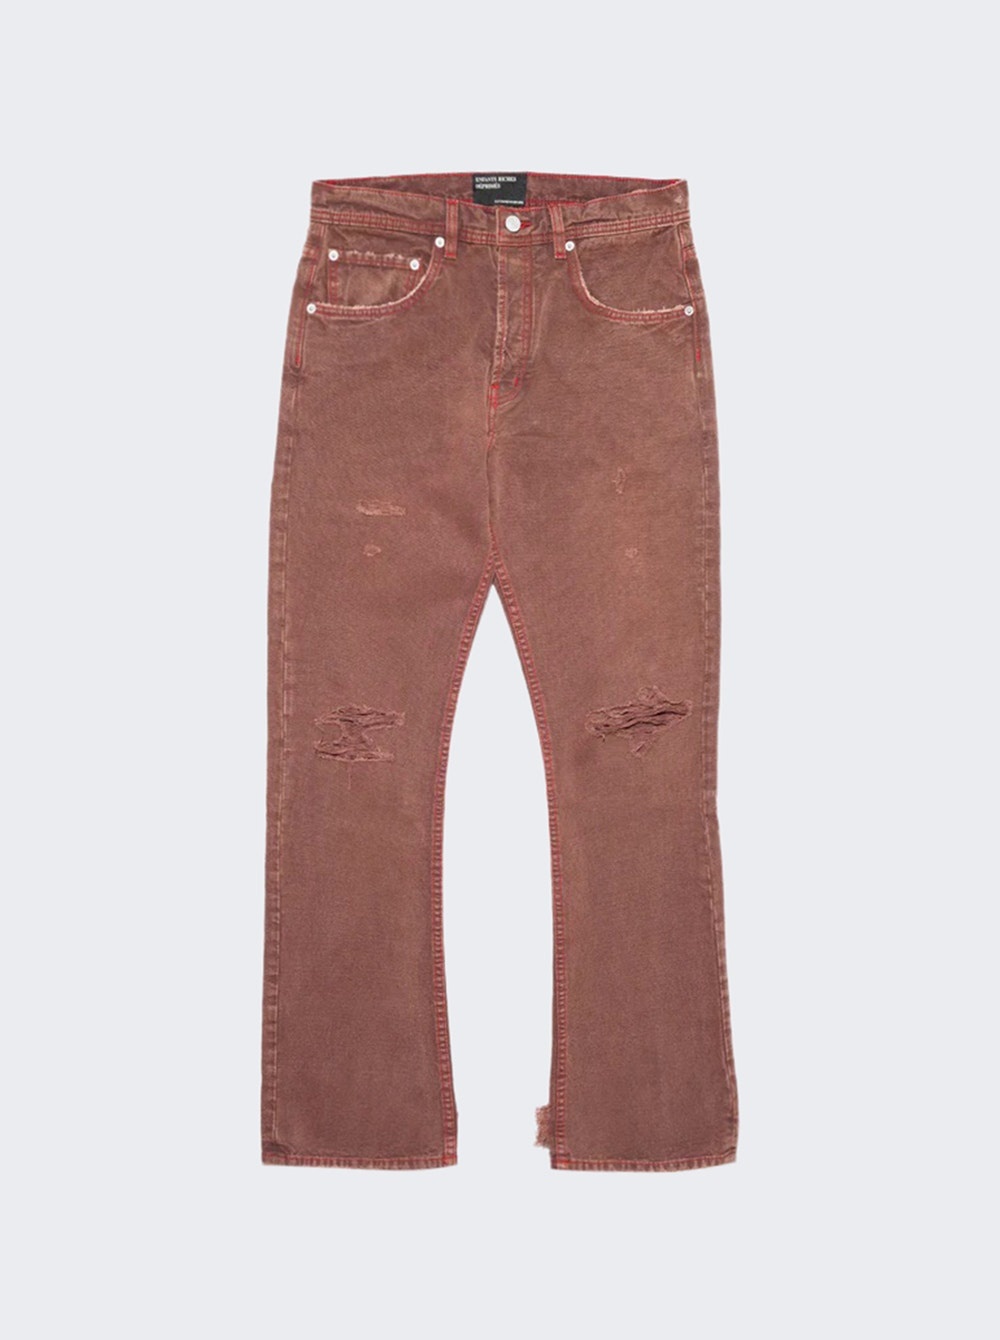 Psychic Youth Flare Jeans Brown and Red - 1